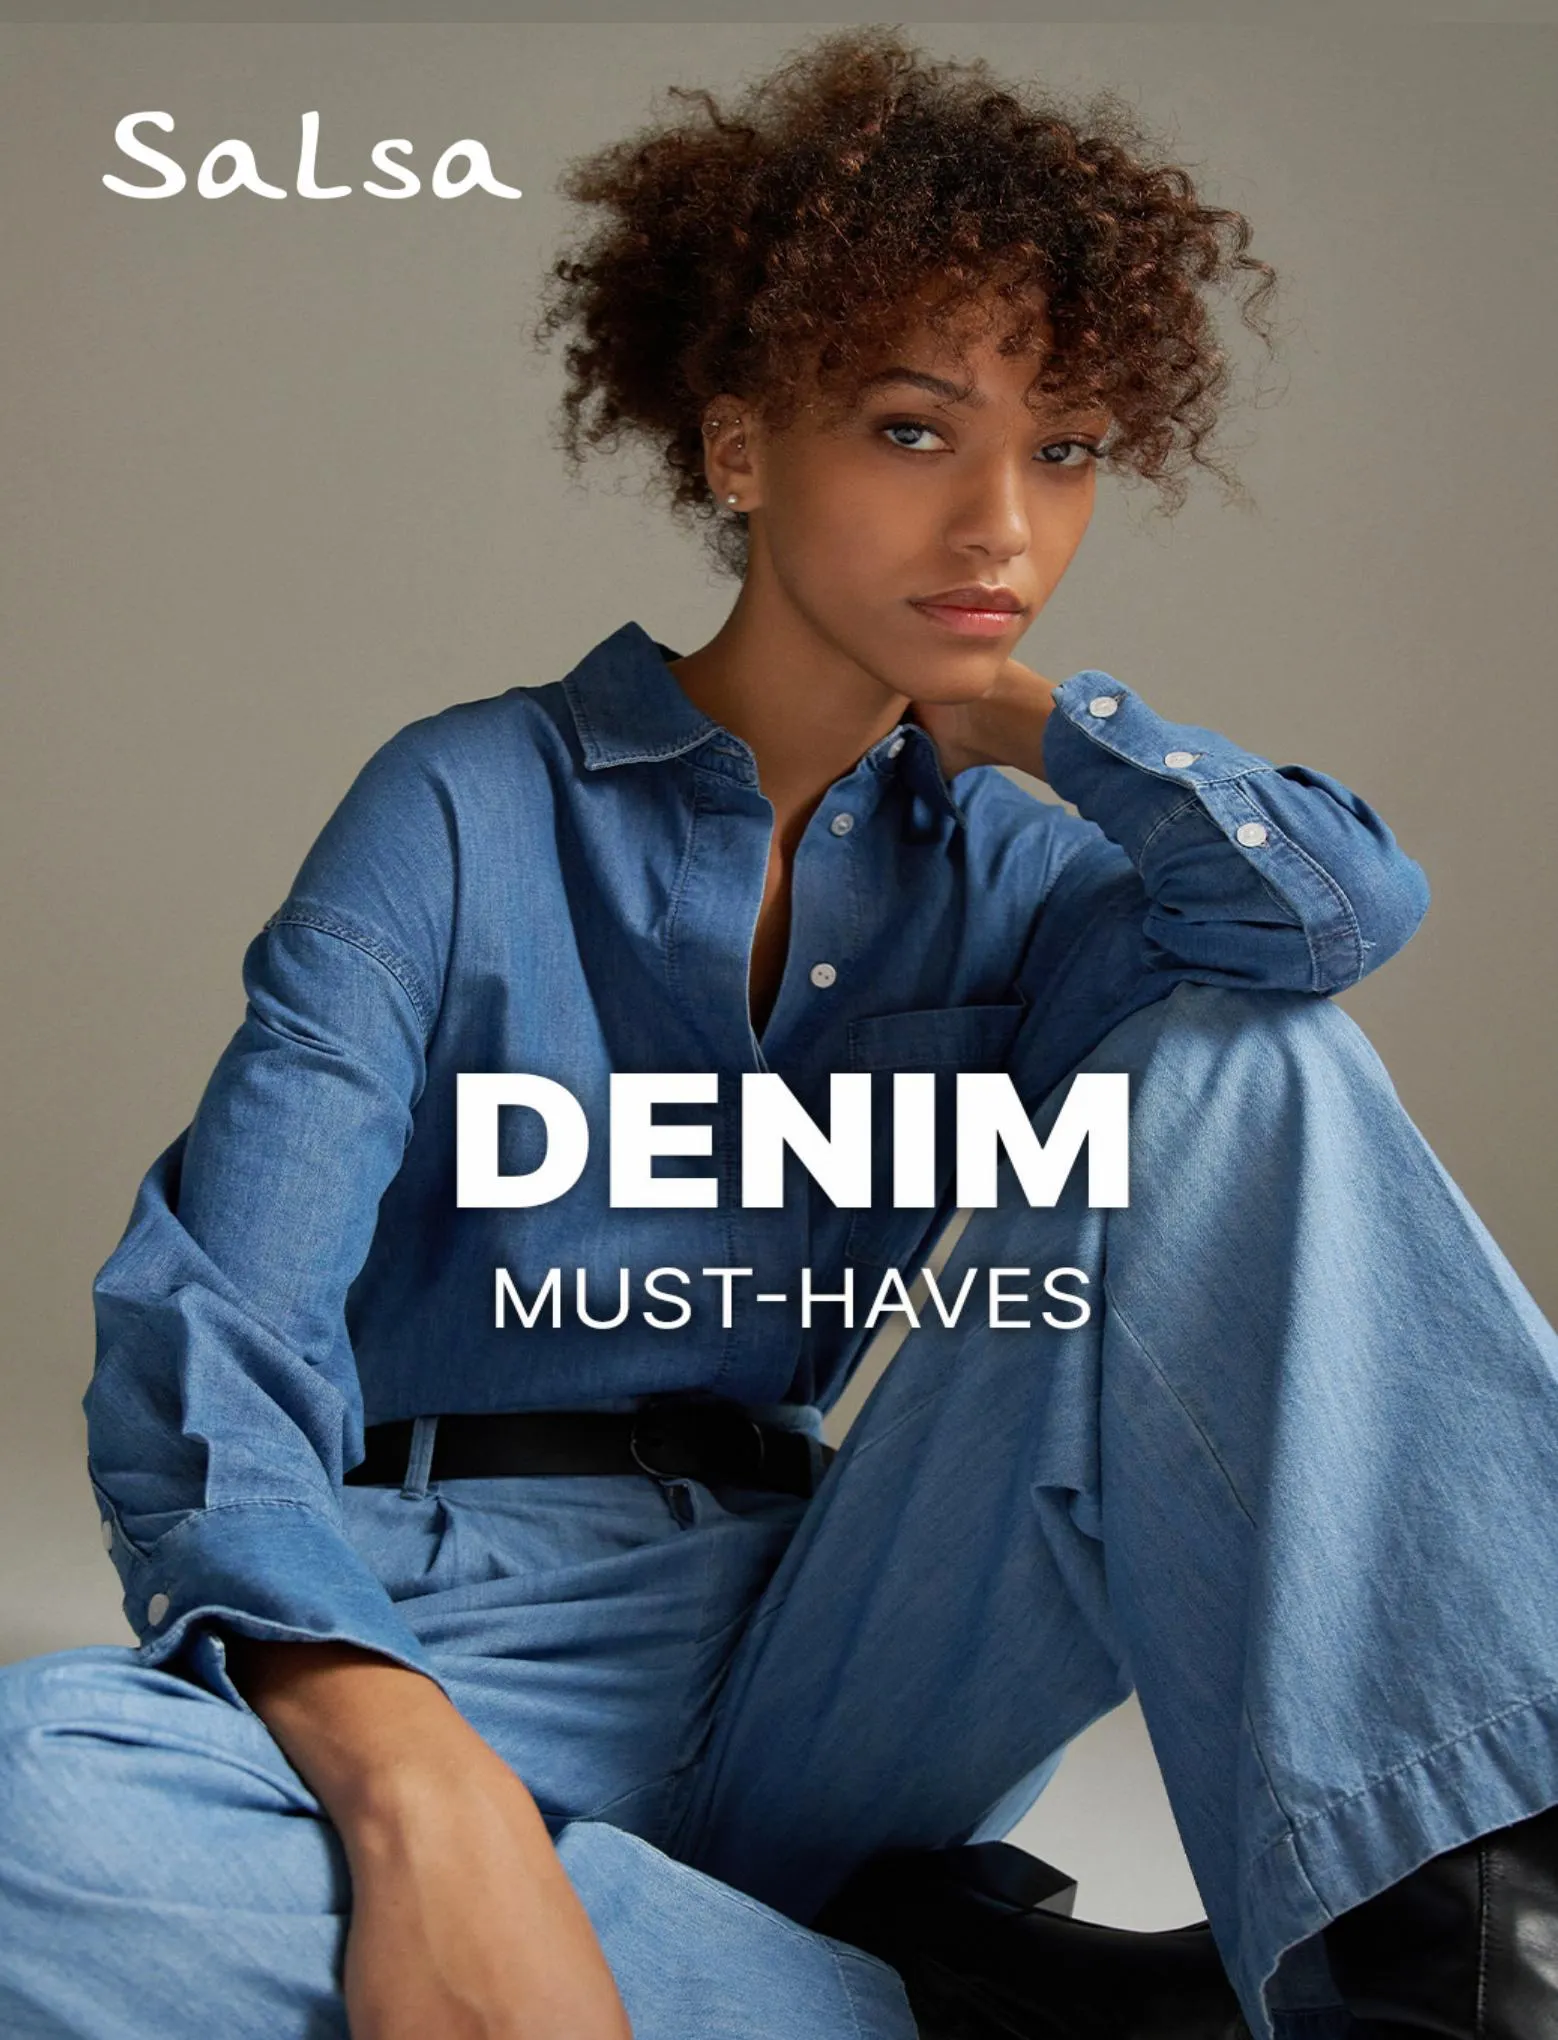 Catalogue Denim Must - Haves, page 00001